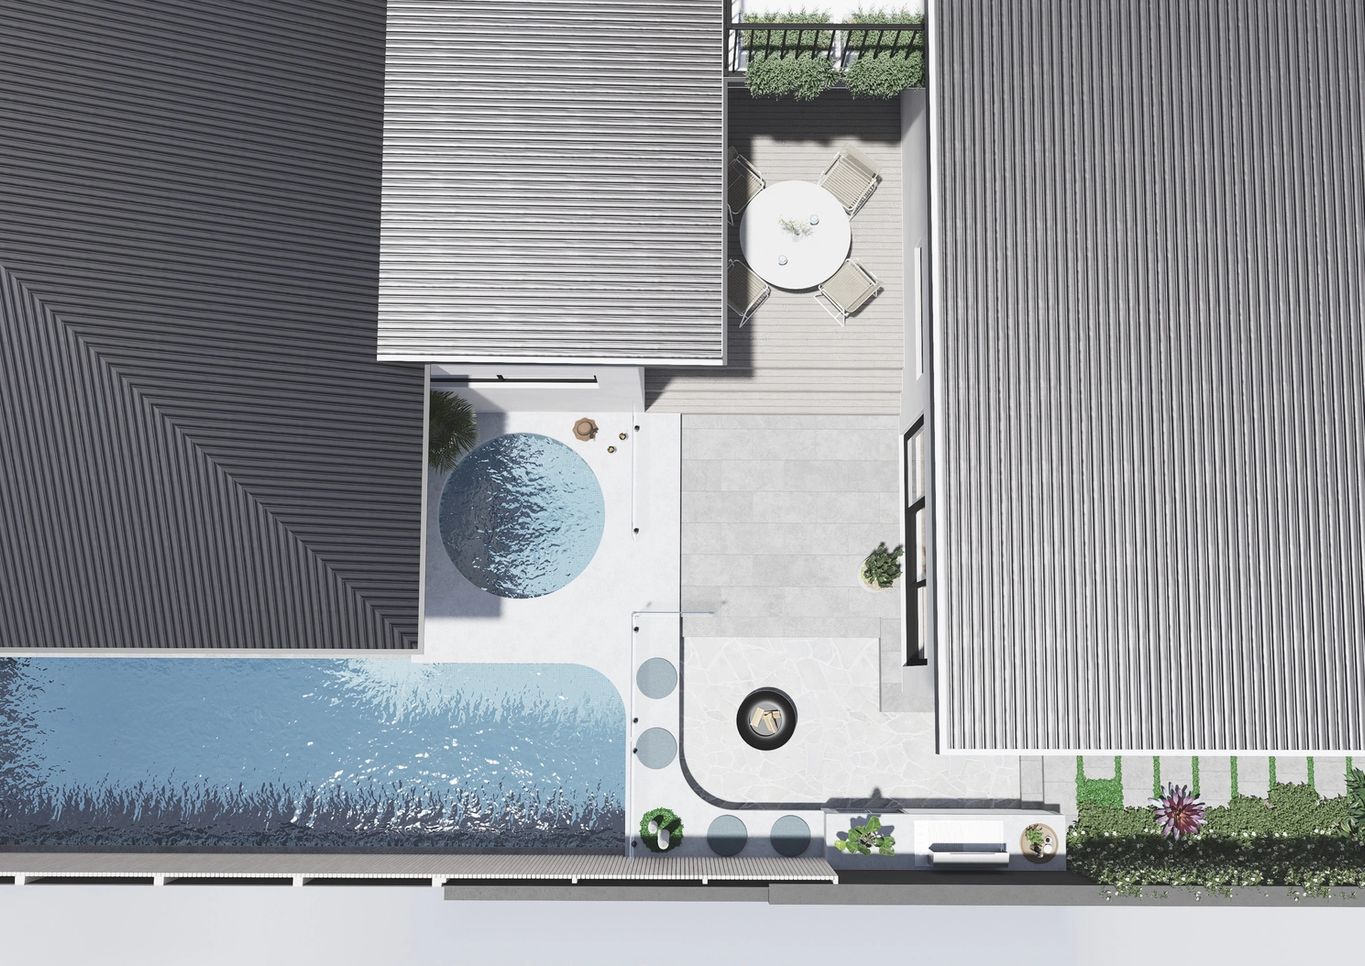 View from above of landscape and pool design